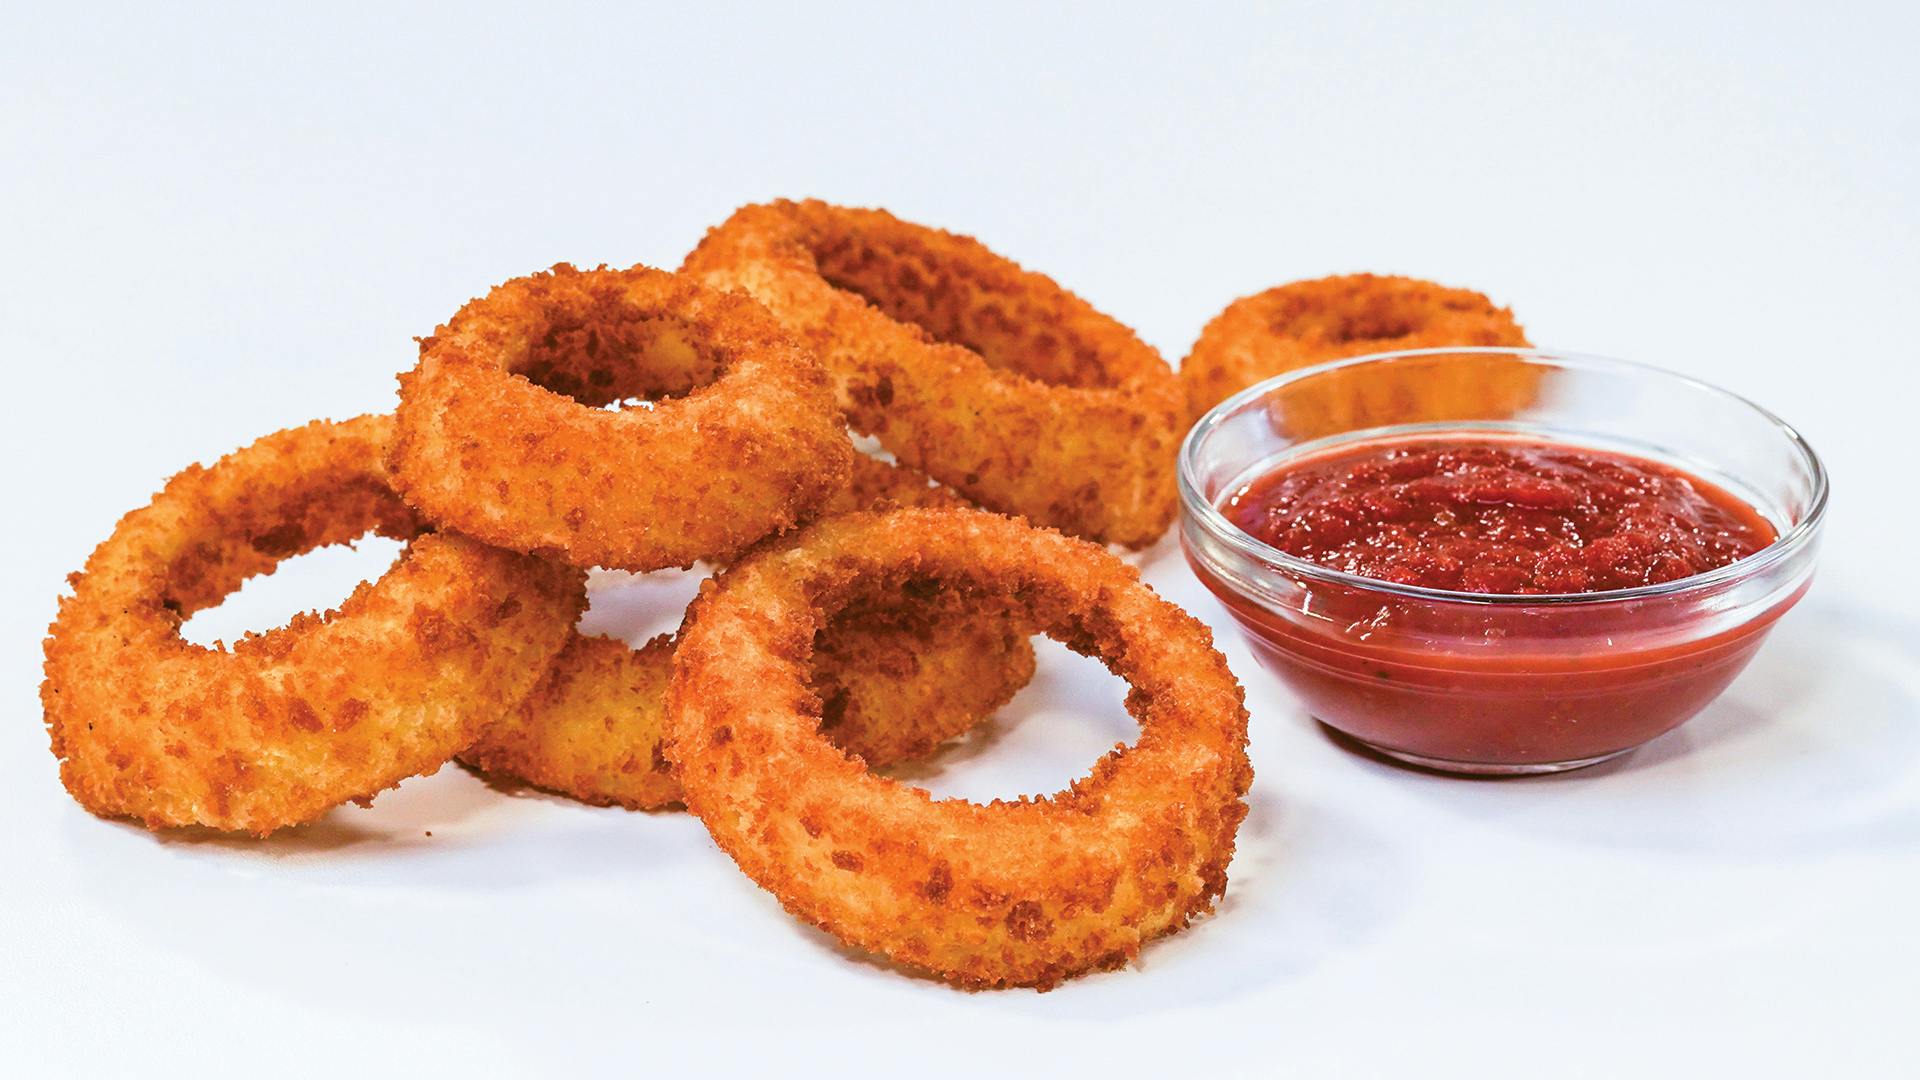 ONION RINGS from Boli's Pizza in Washington, DC